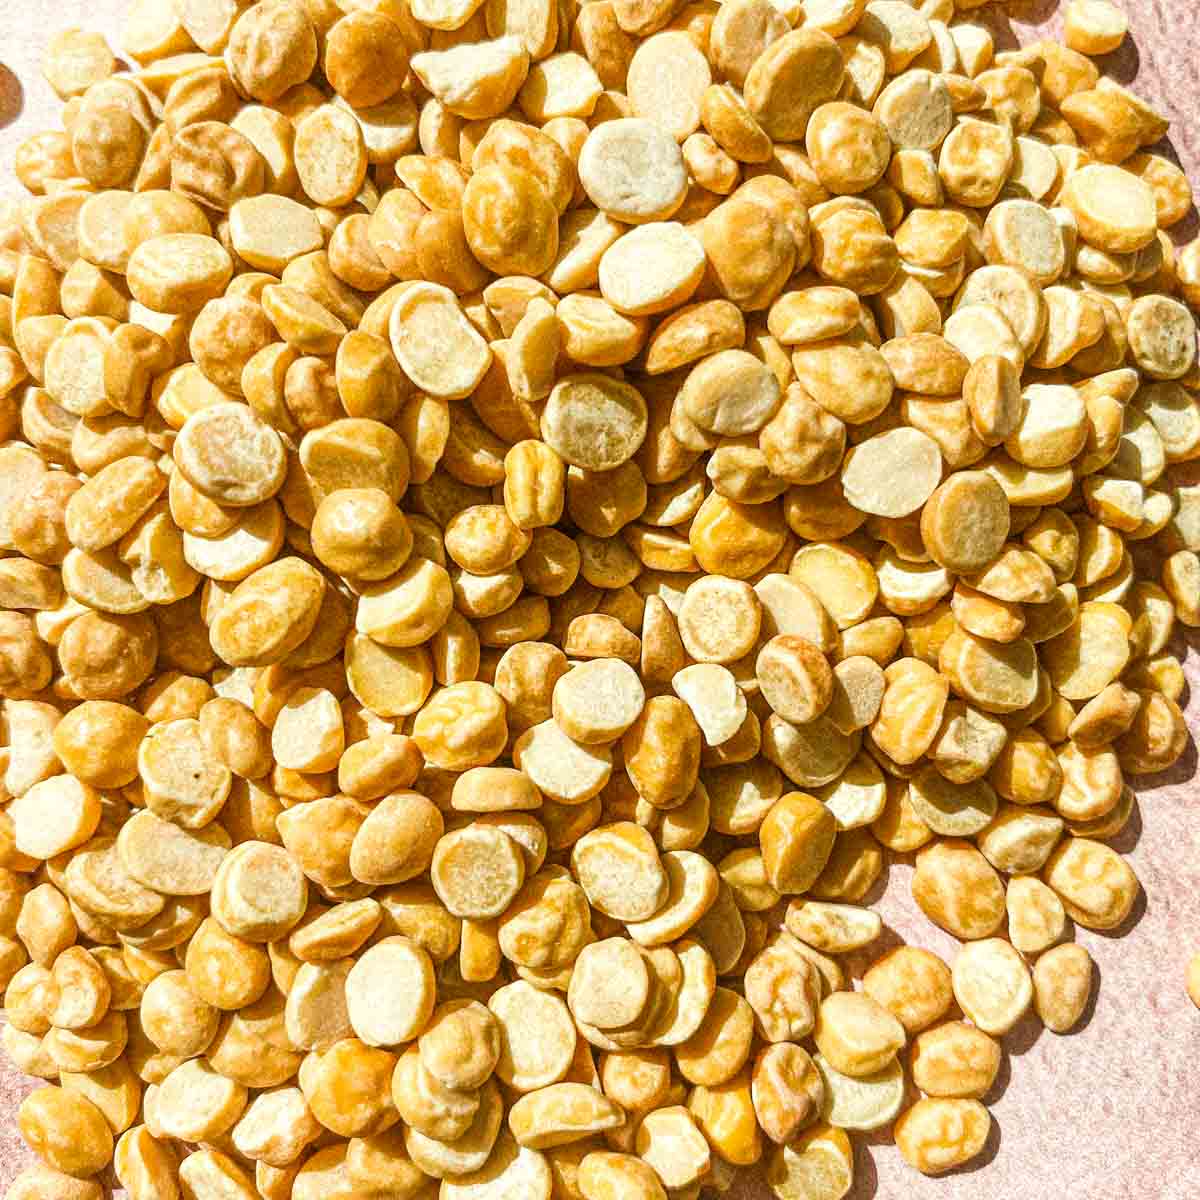 Chana dal or split and hulled chickpeas